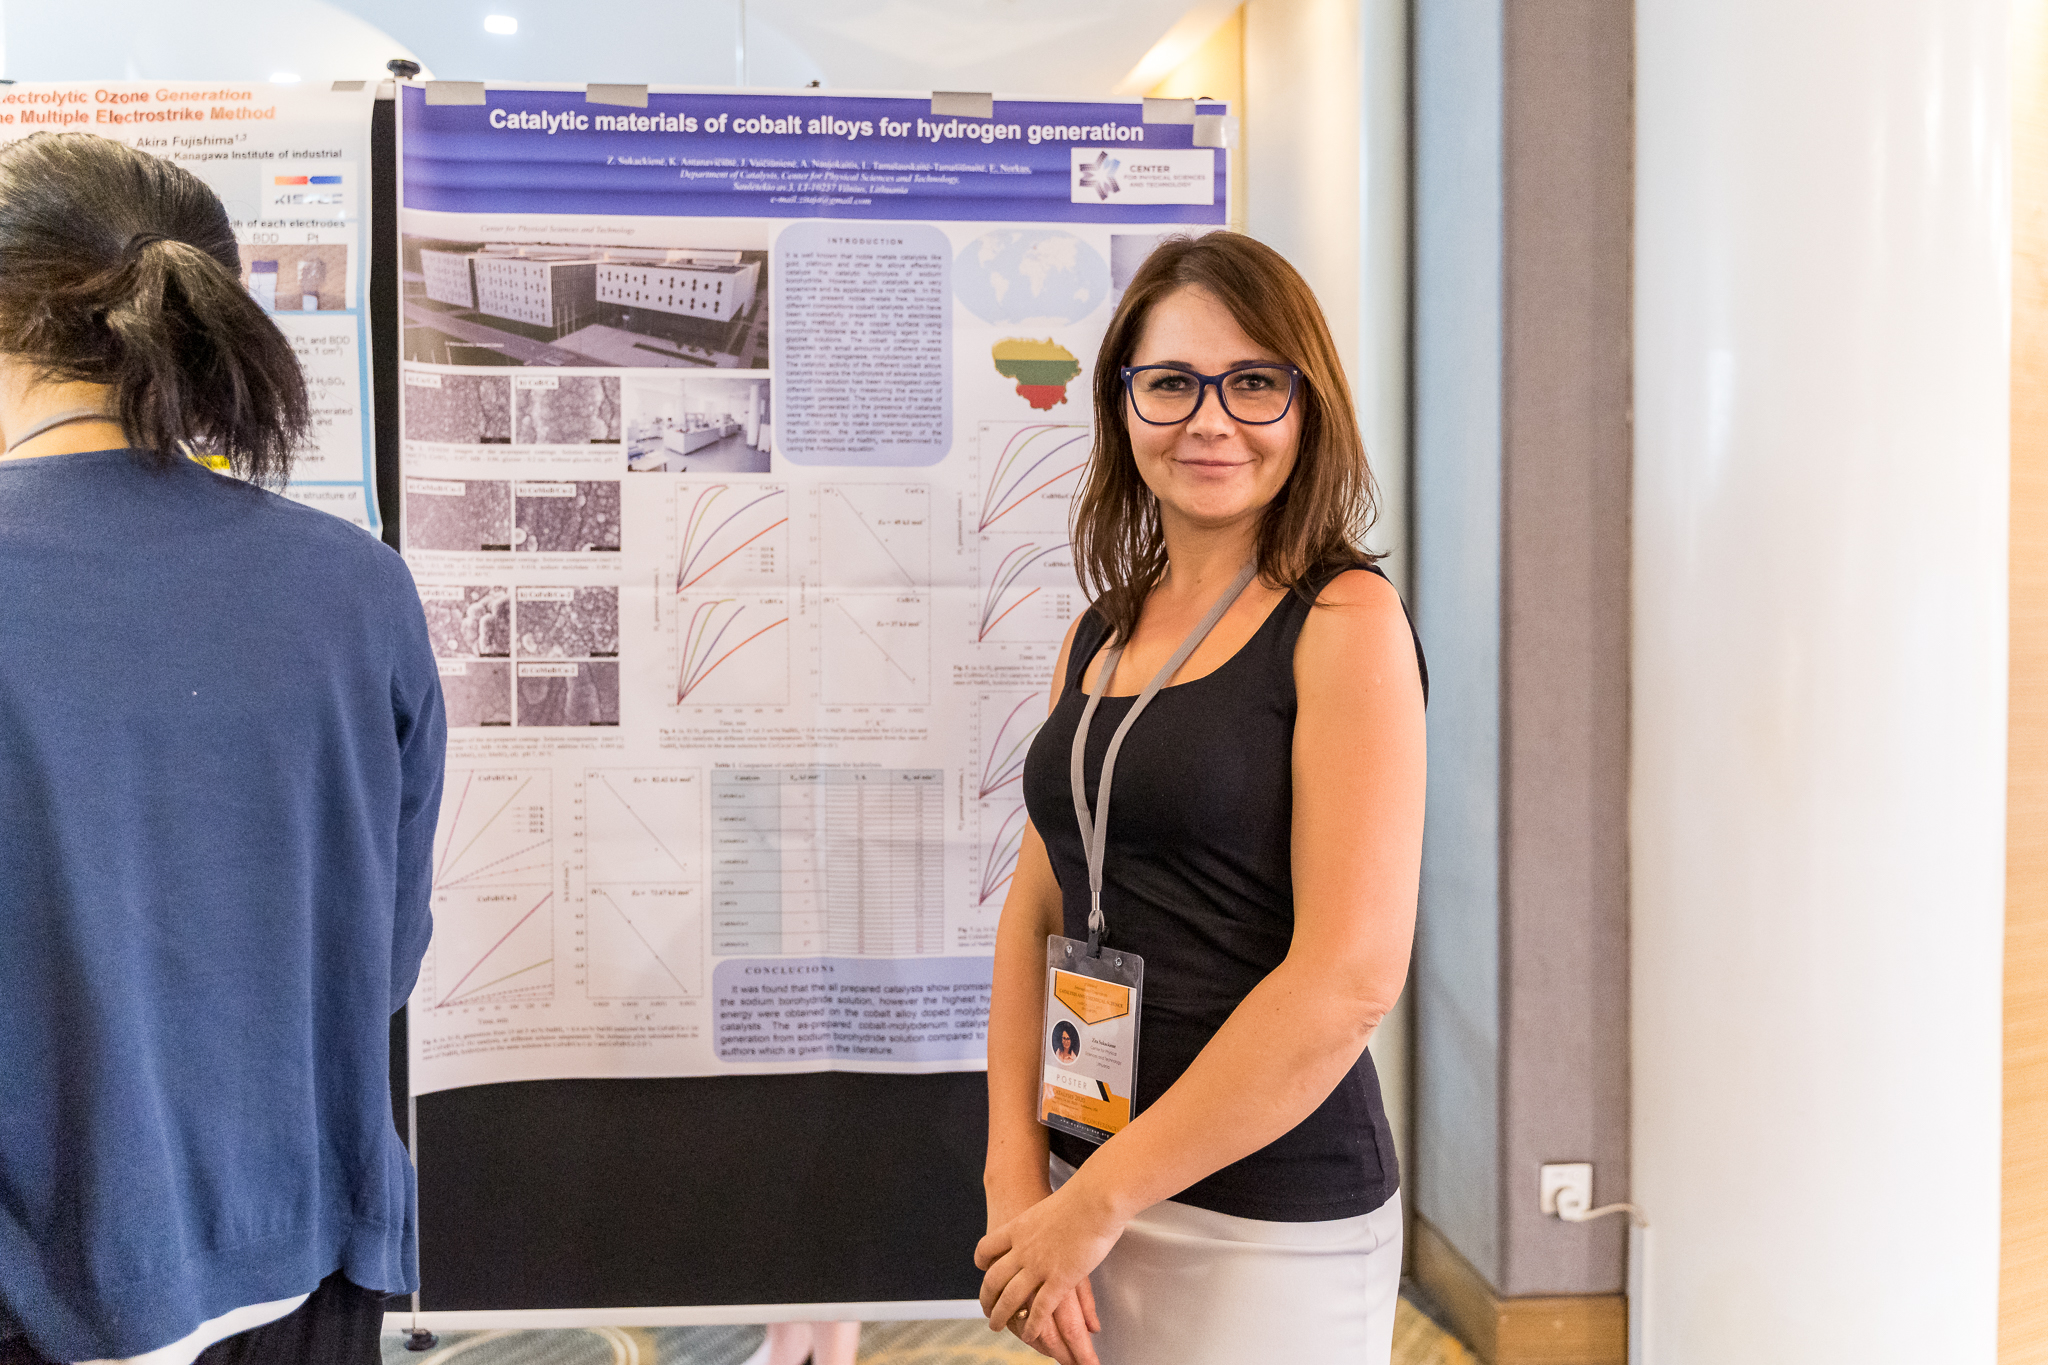 Catalysis Conferences Gallery